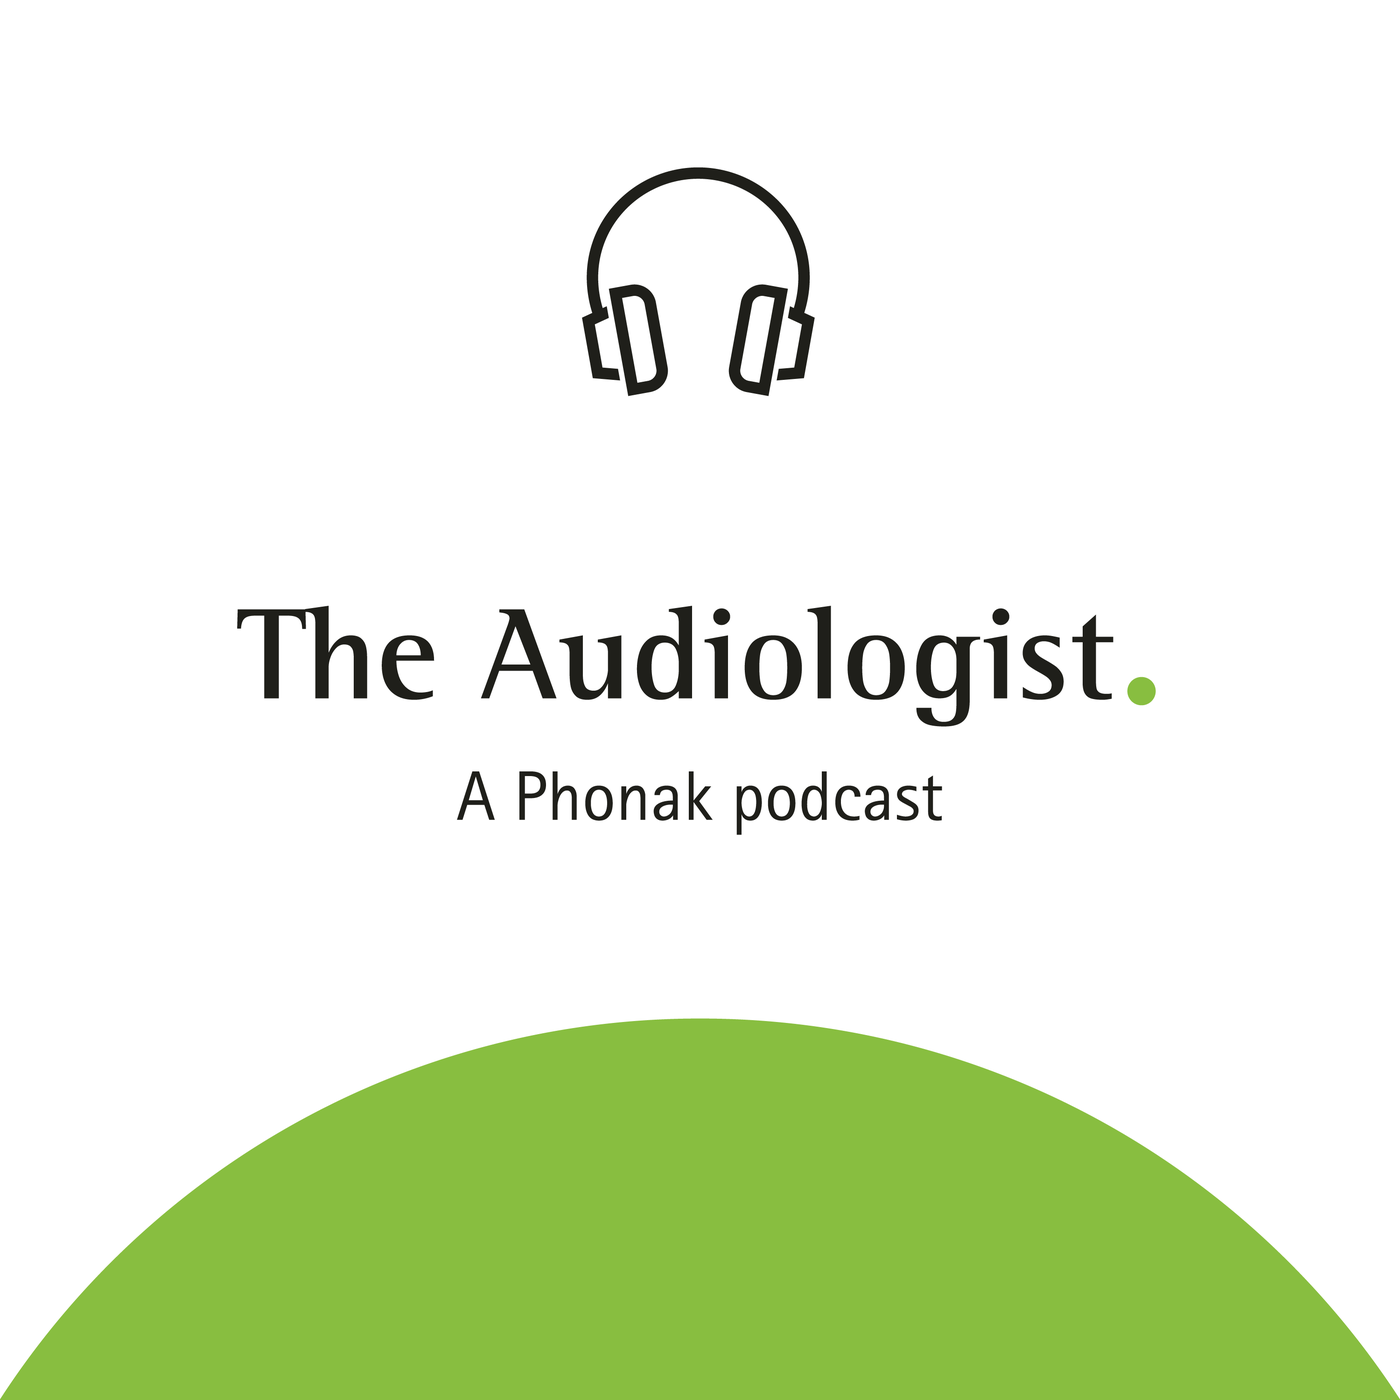 The Audiologist - A Phonak podcast